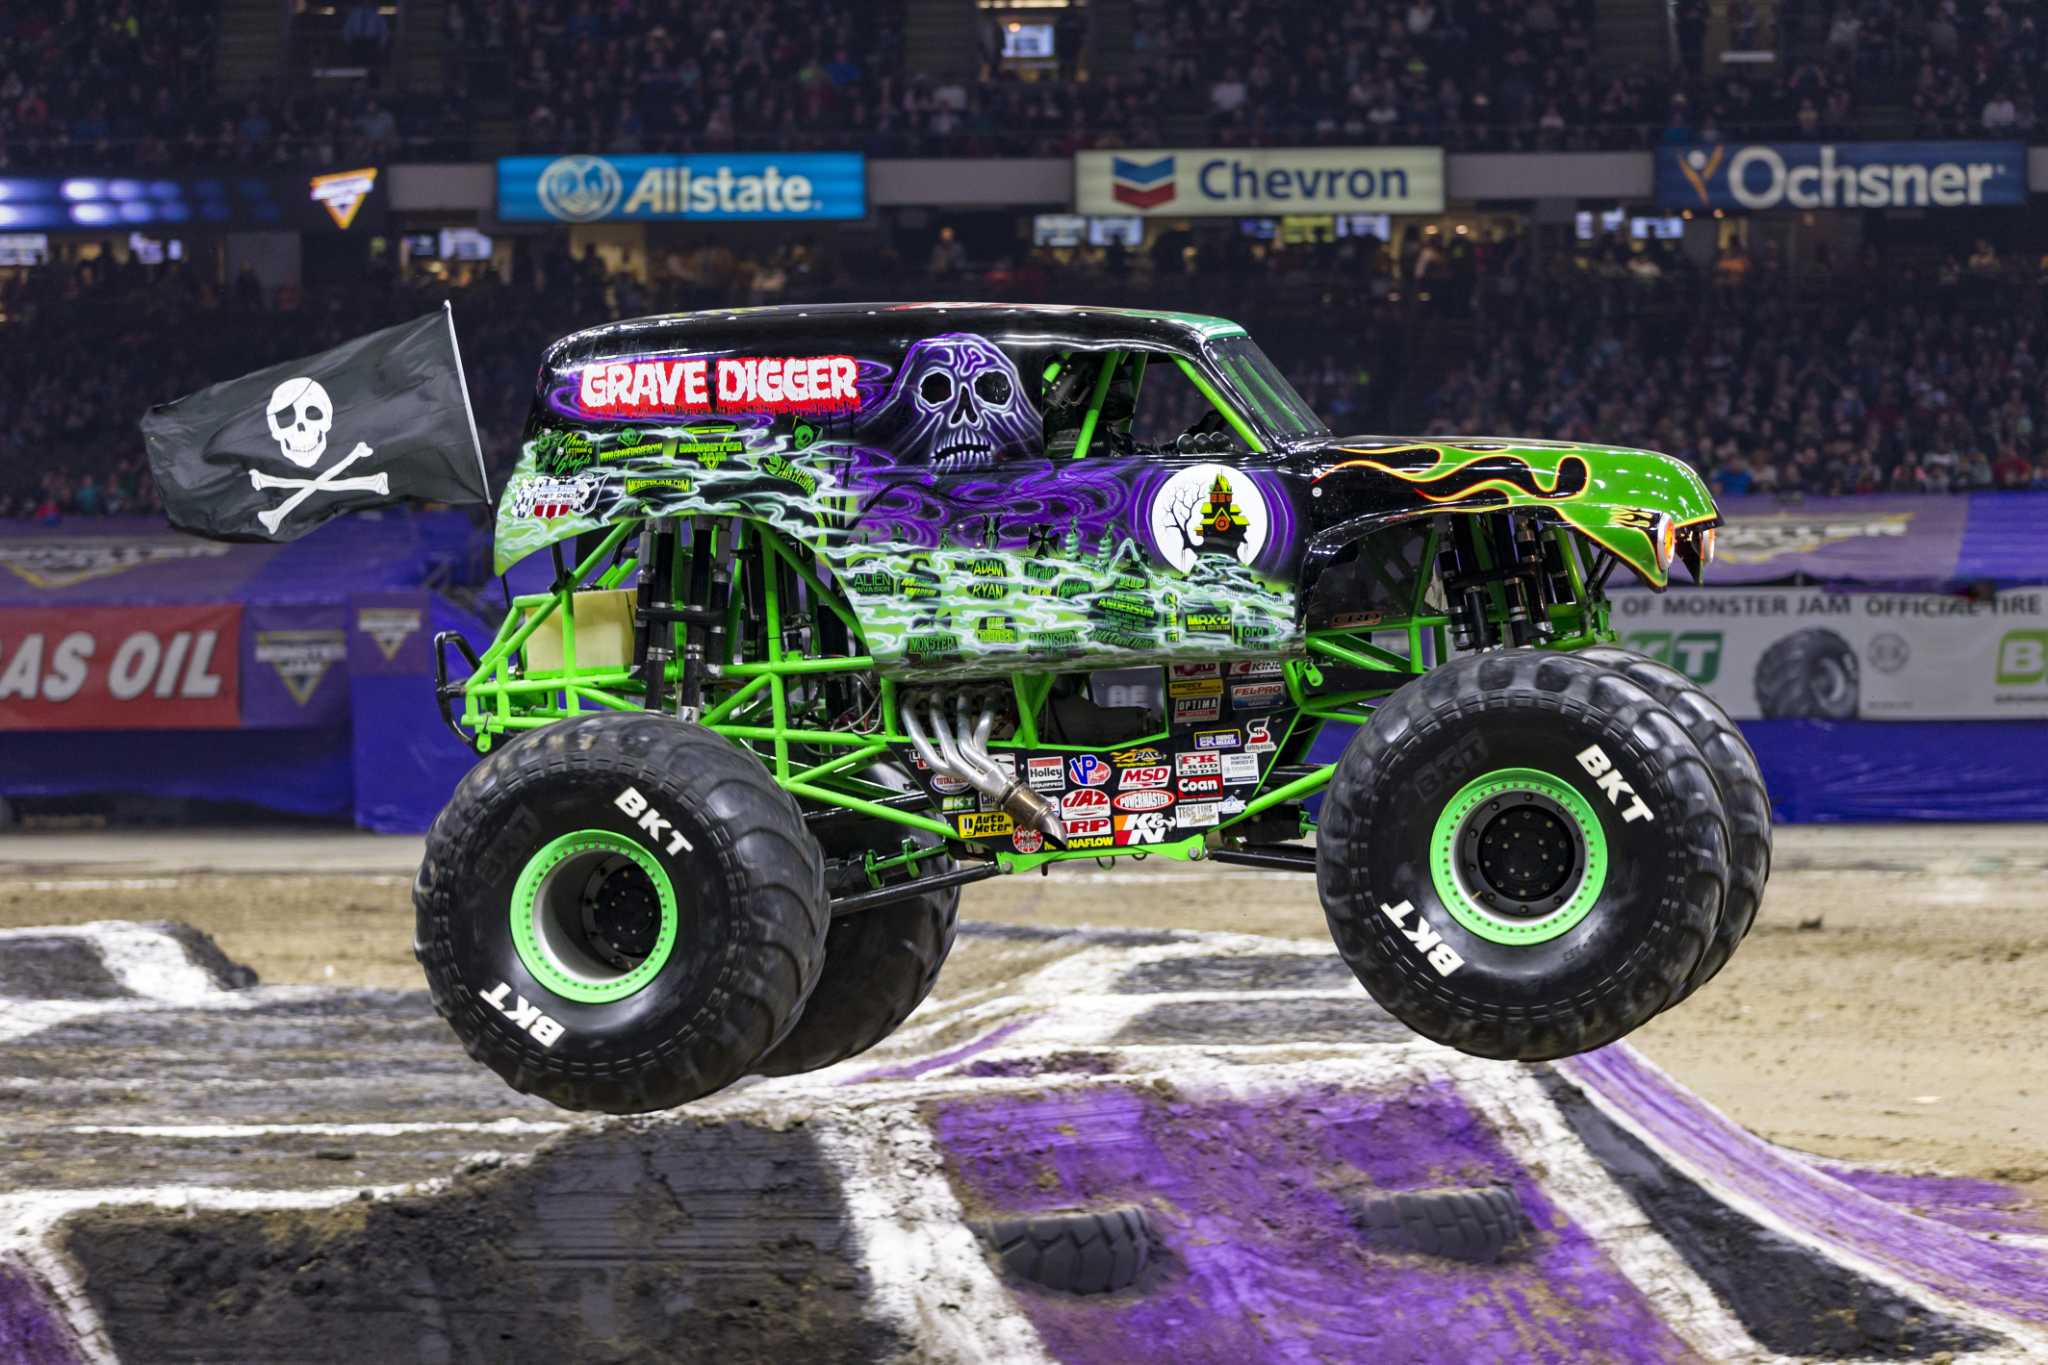 Here are the trucks competing in this weekend's Monster Jam in San Antonio